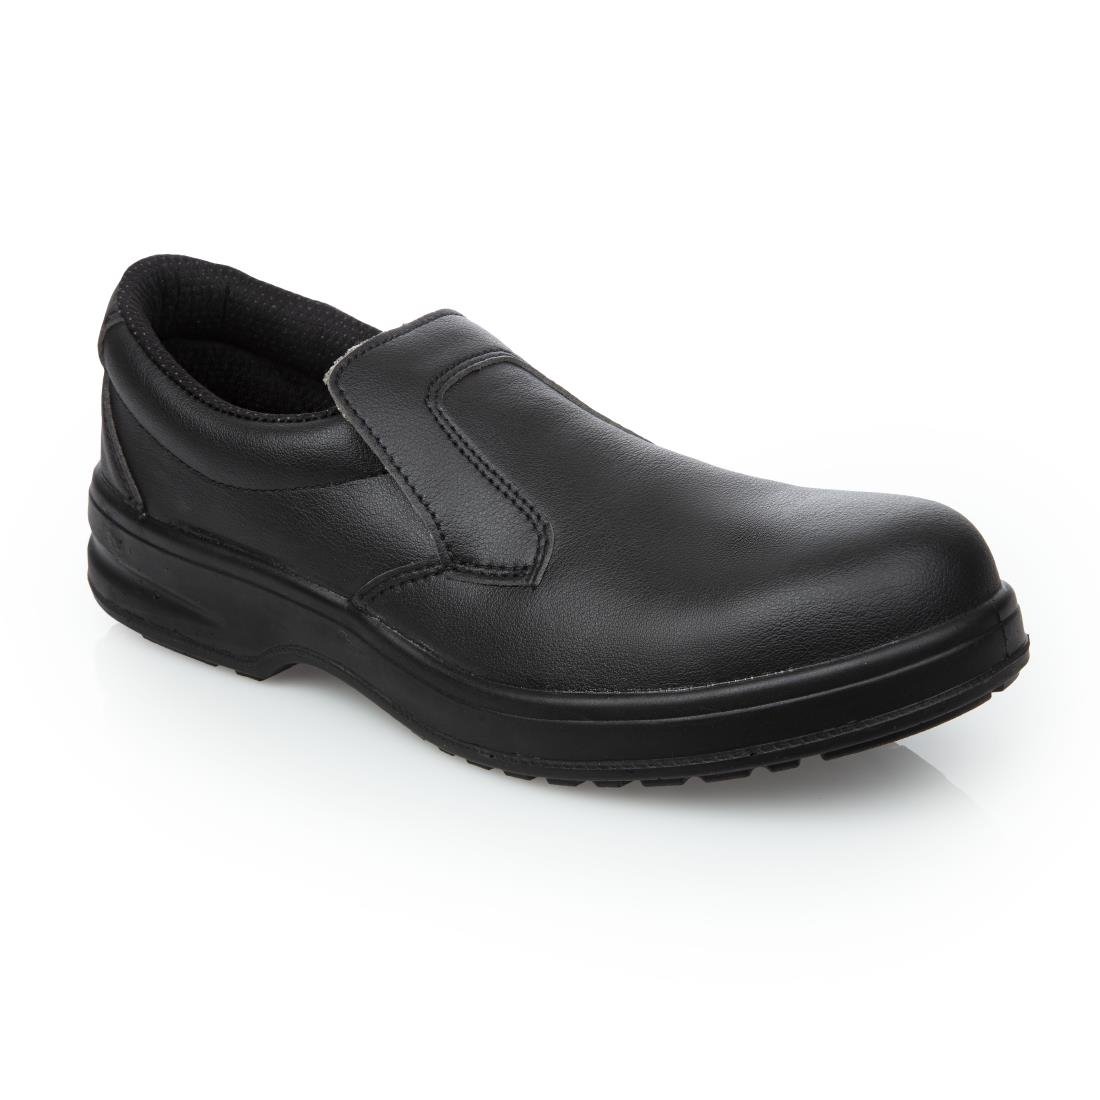 A845-47 Slipbuster Lite Slip On Safety Shoes Black 47 JD Catering Equipment Solutions Ltd